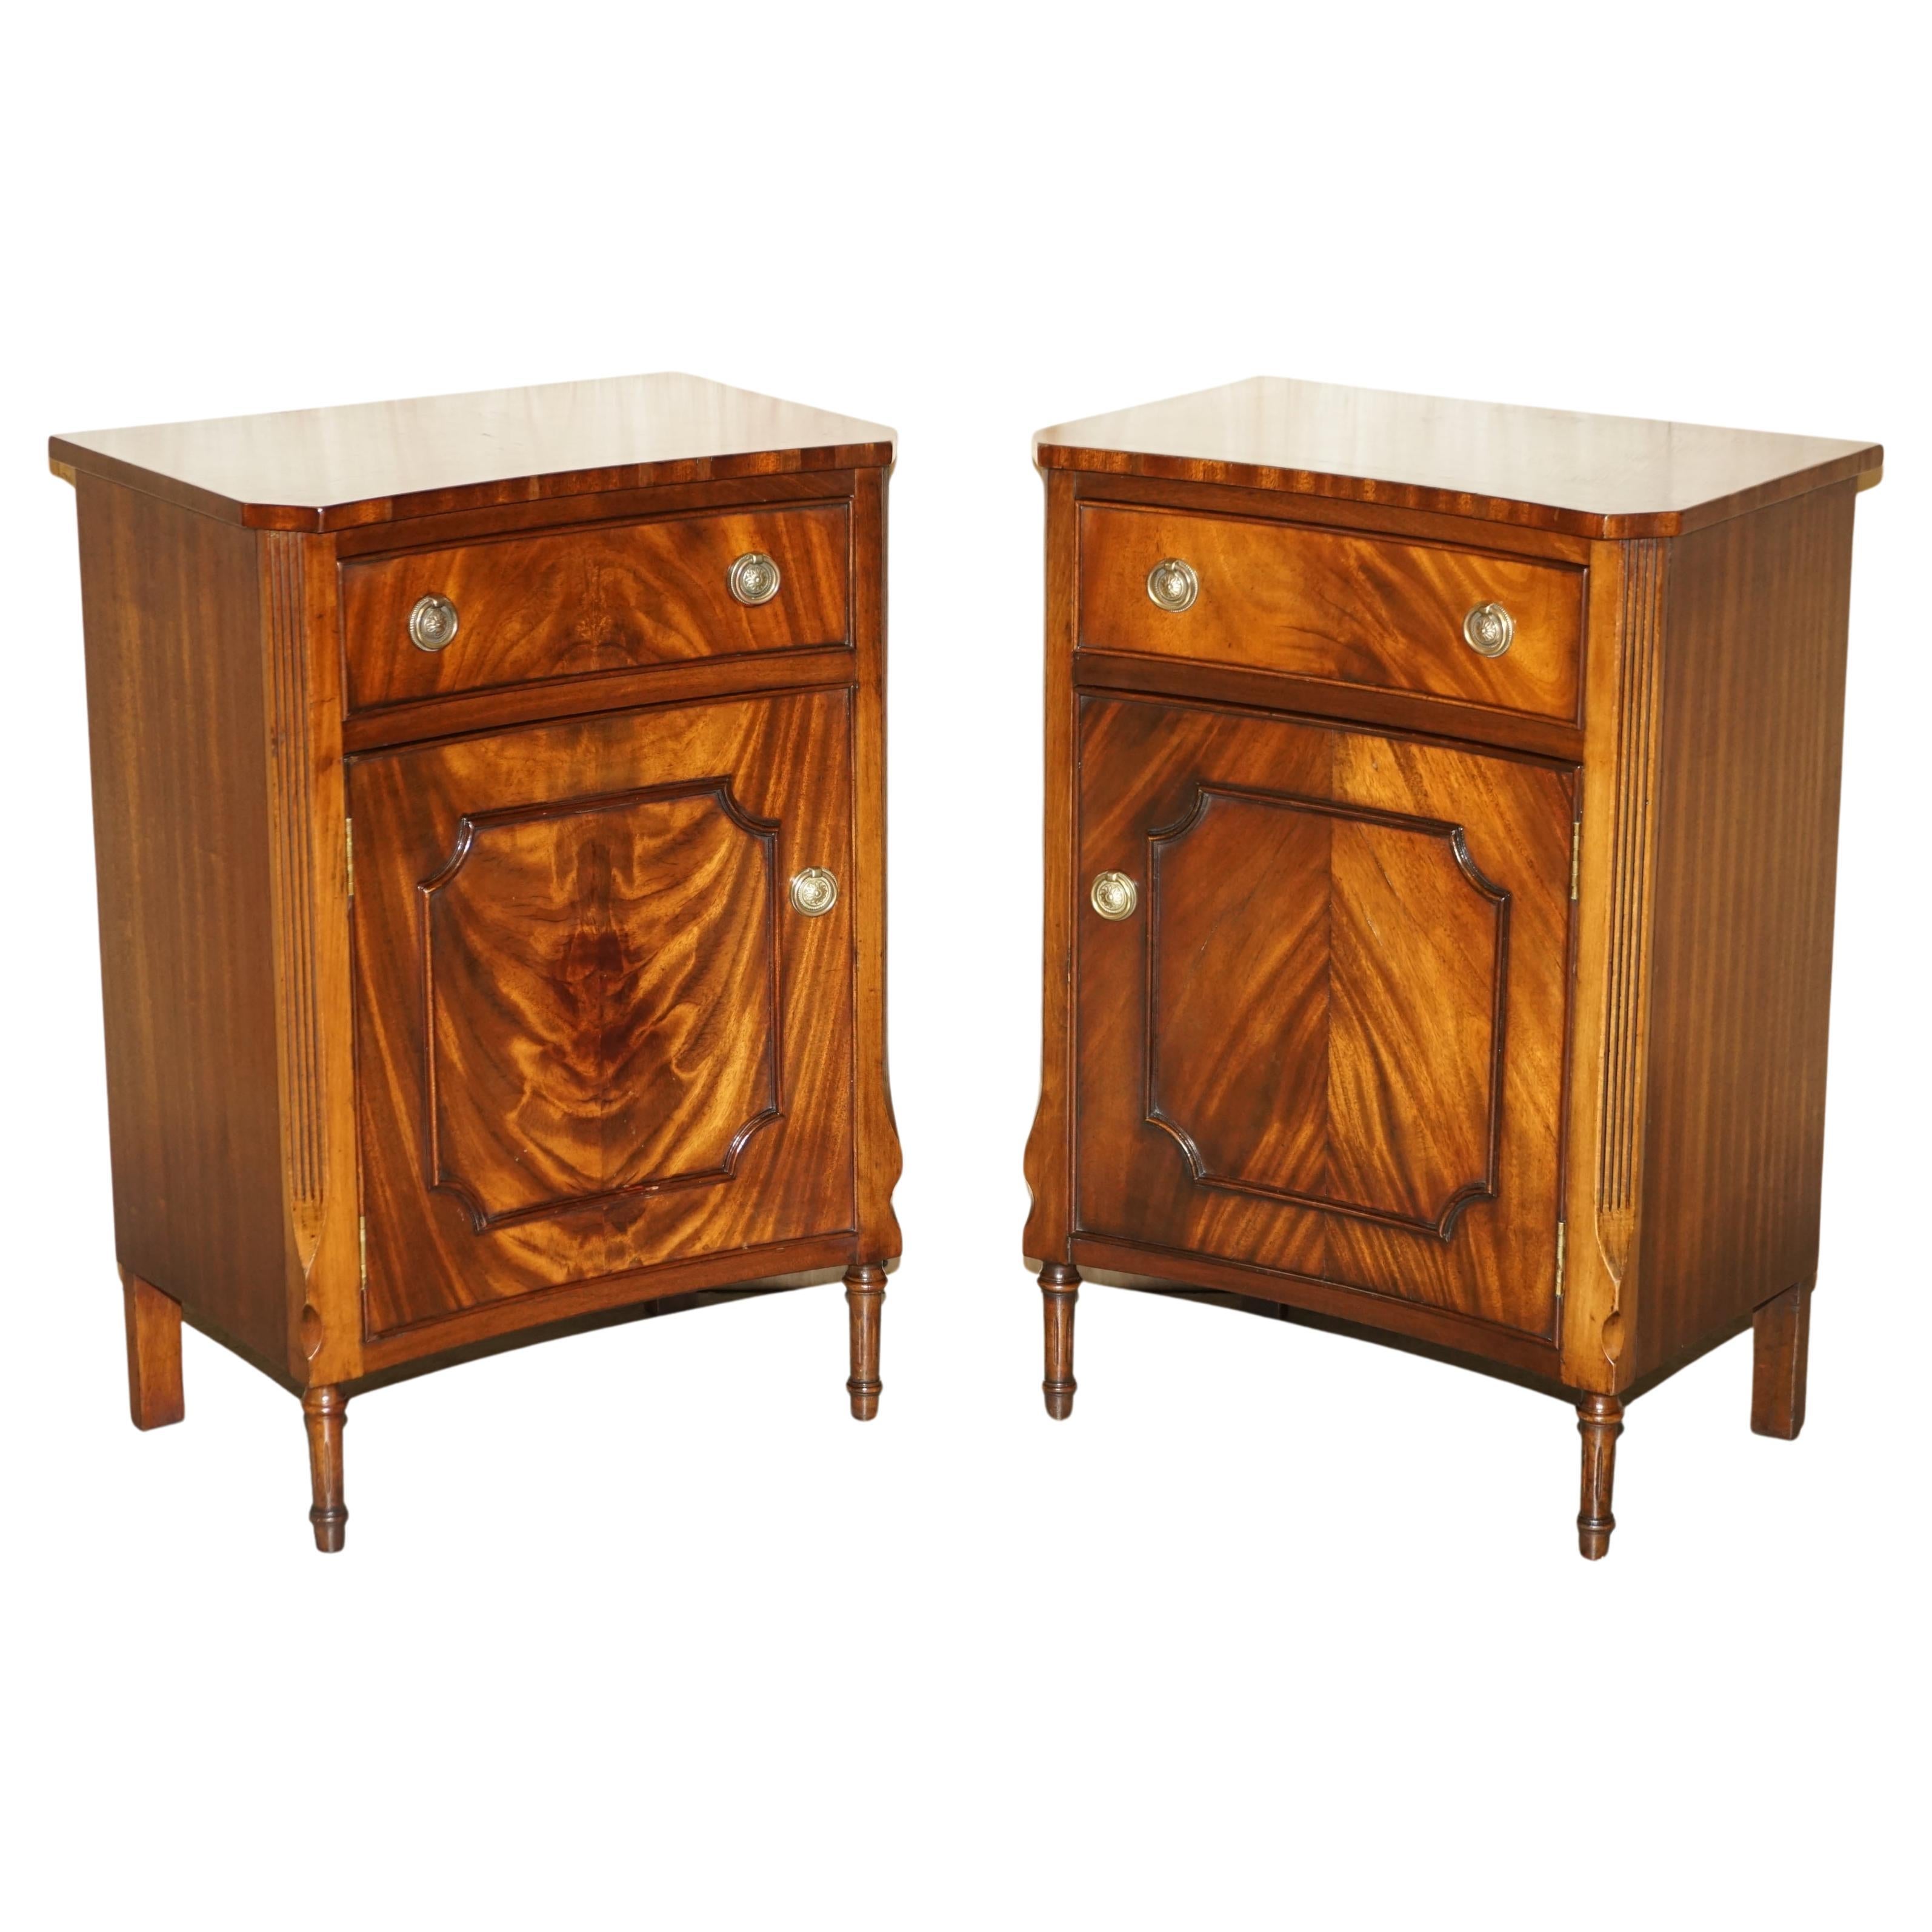 Stunning Pair of Vintage Bow Fronted Flamed Hardwood Side End Table Cupbards